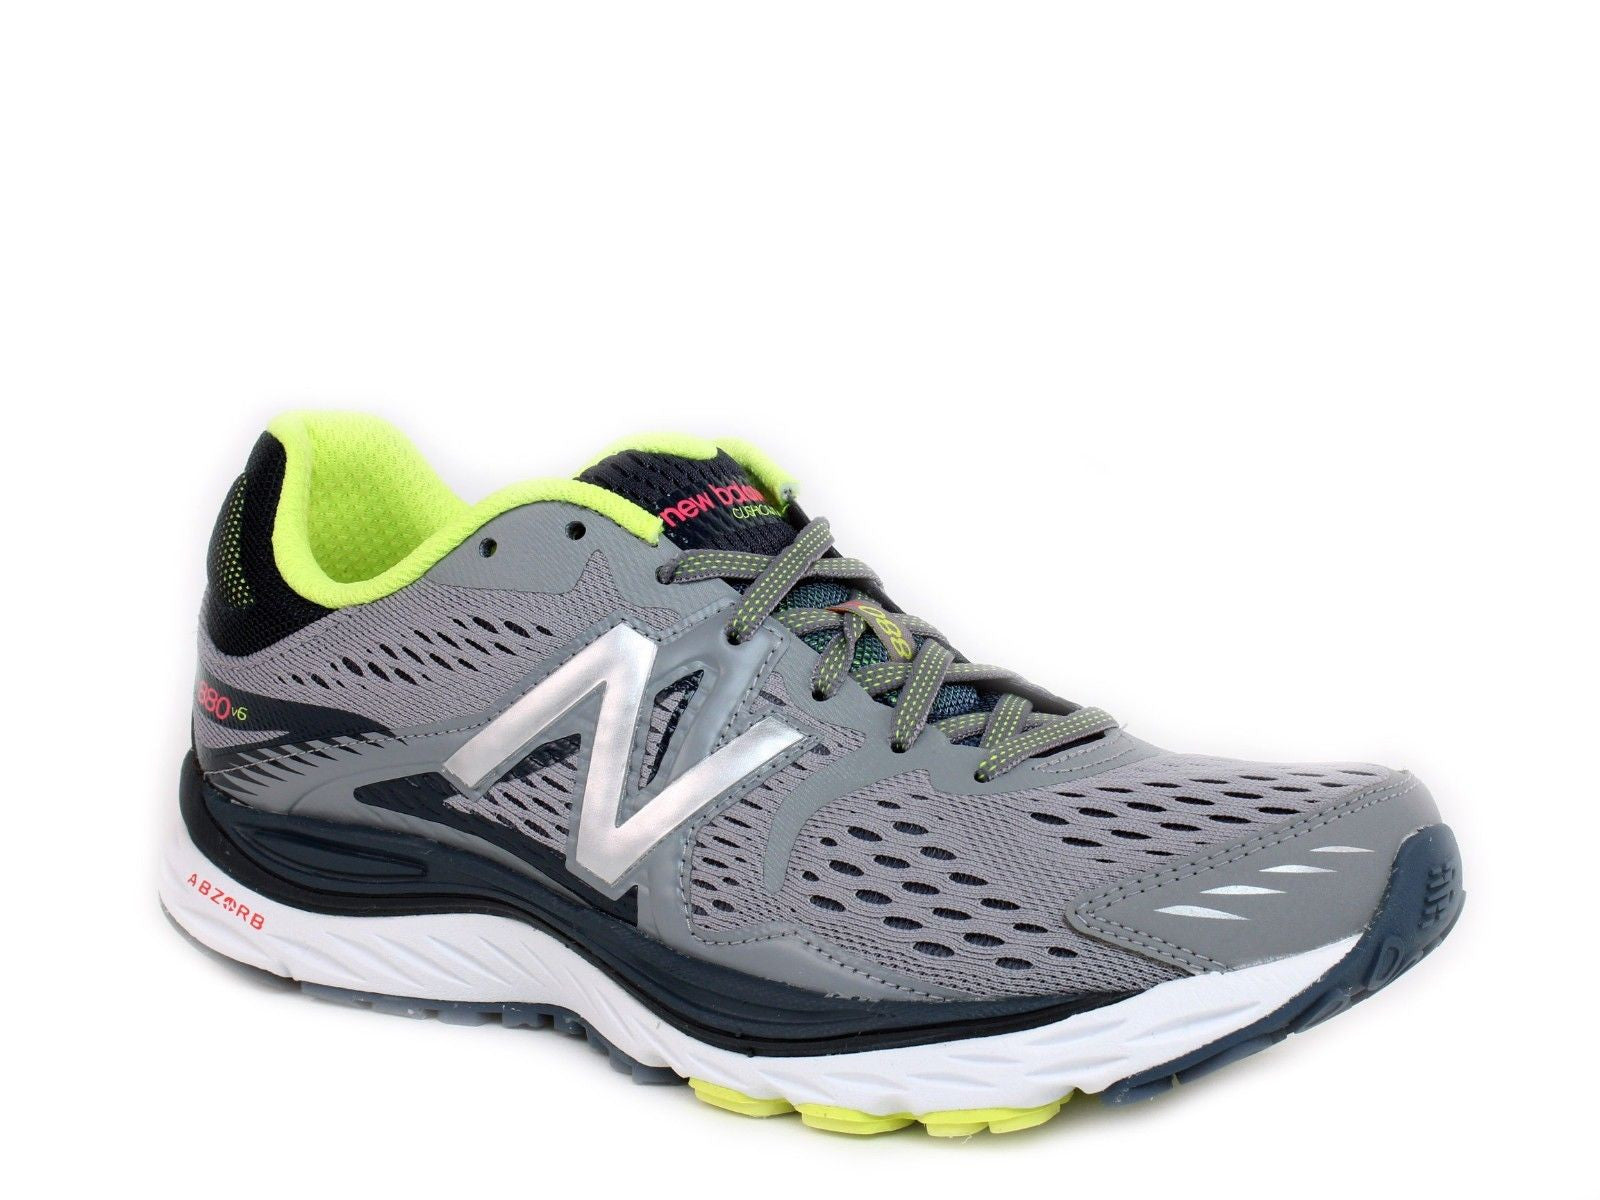 n balance running shoes off 50% - www 